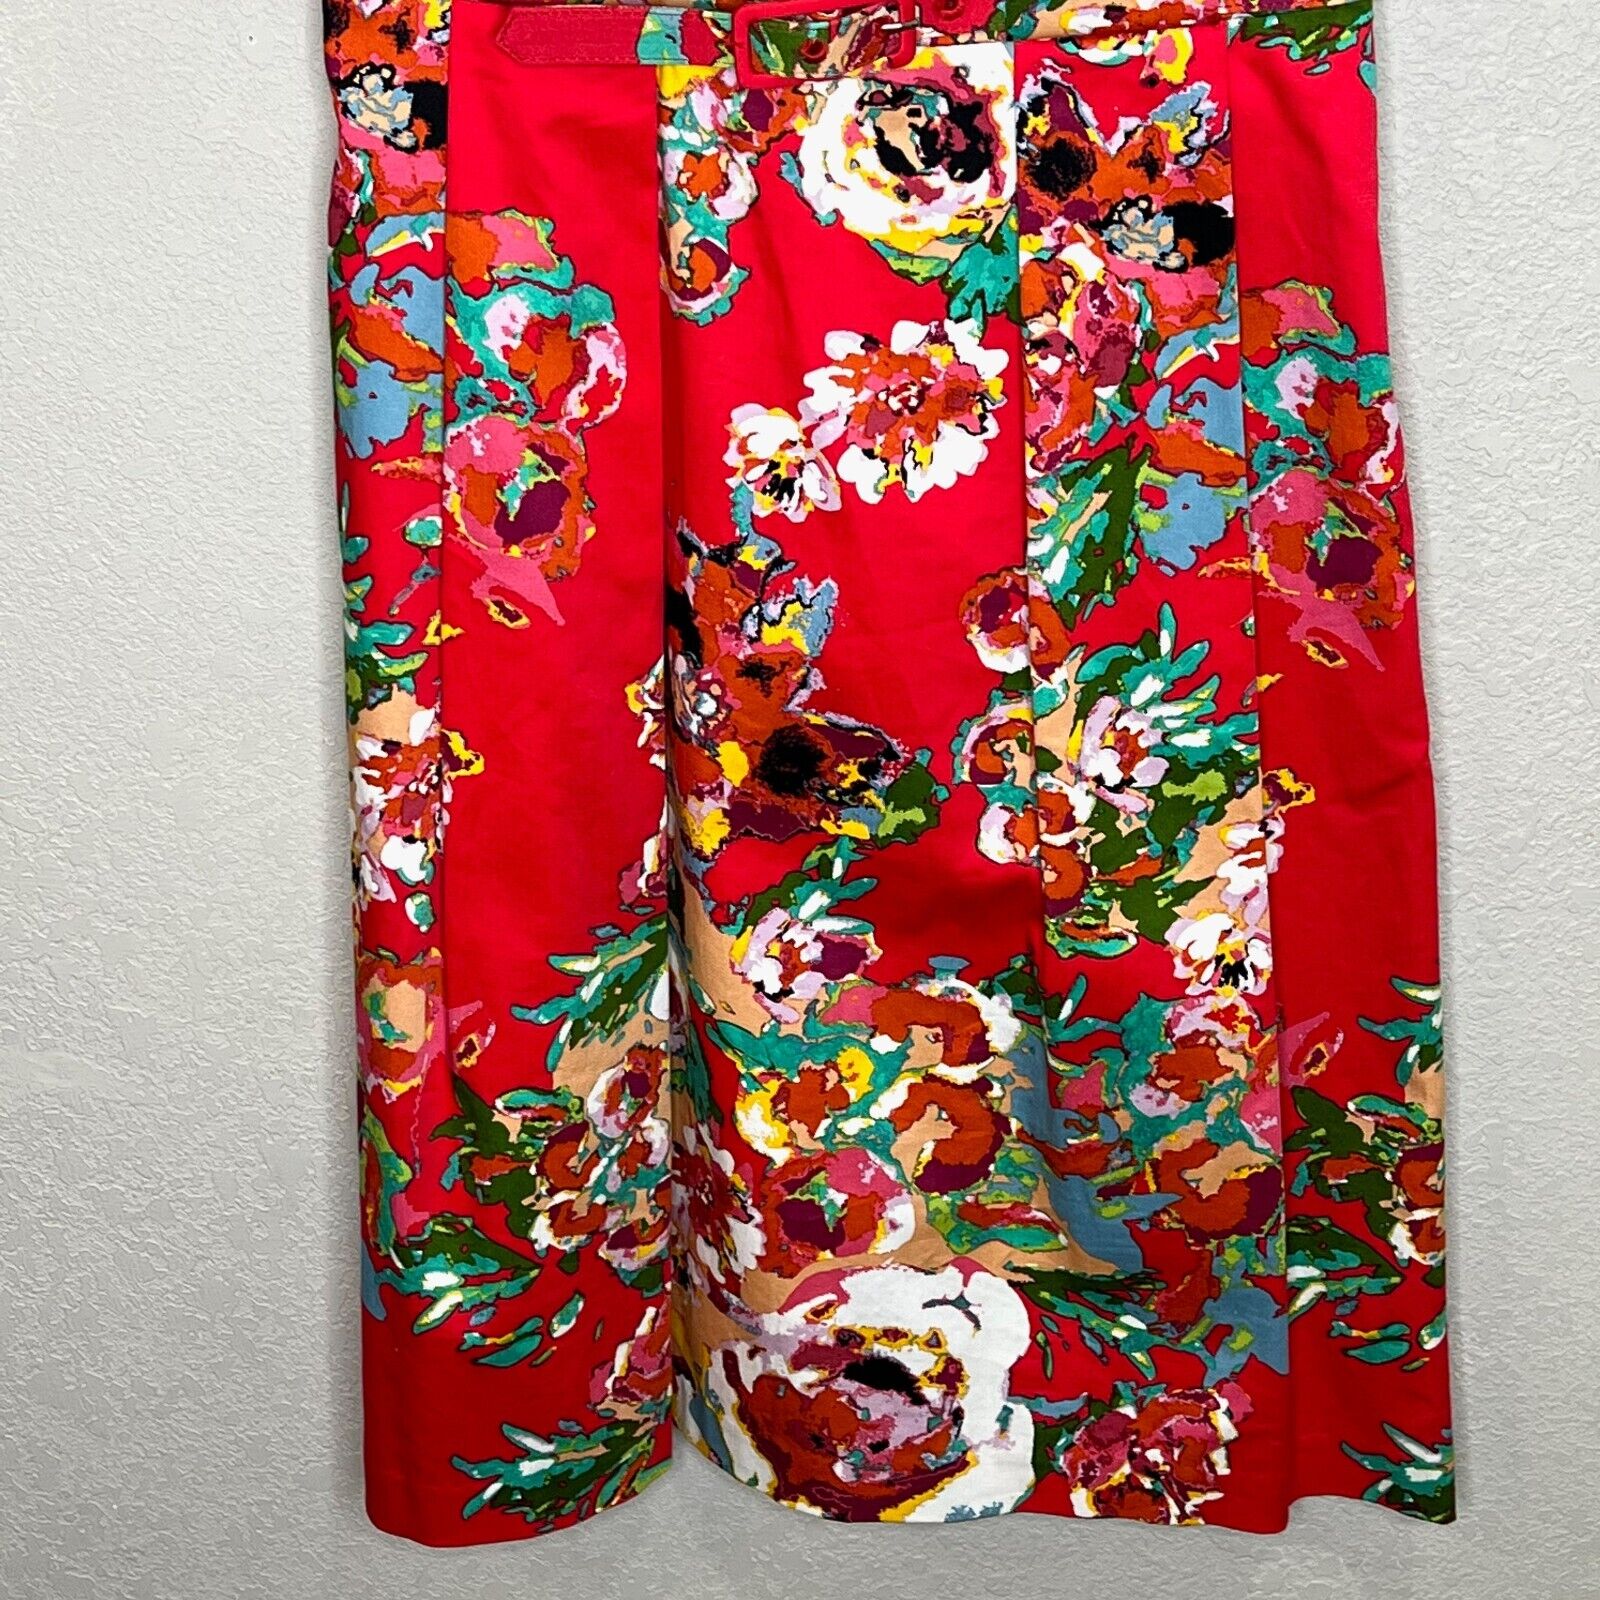 Adrianna Papell Sleeveless Red Floral Sleeveless Dress w Belted Waist Size 4